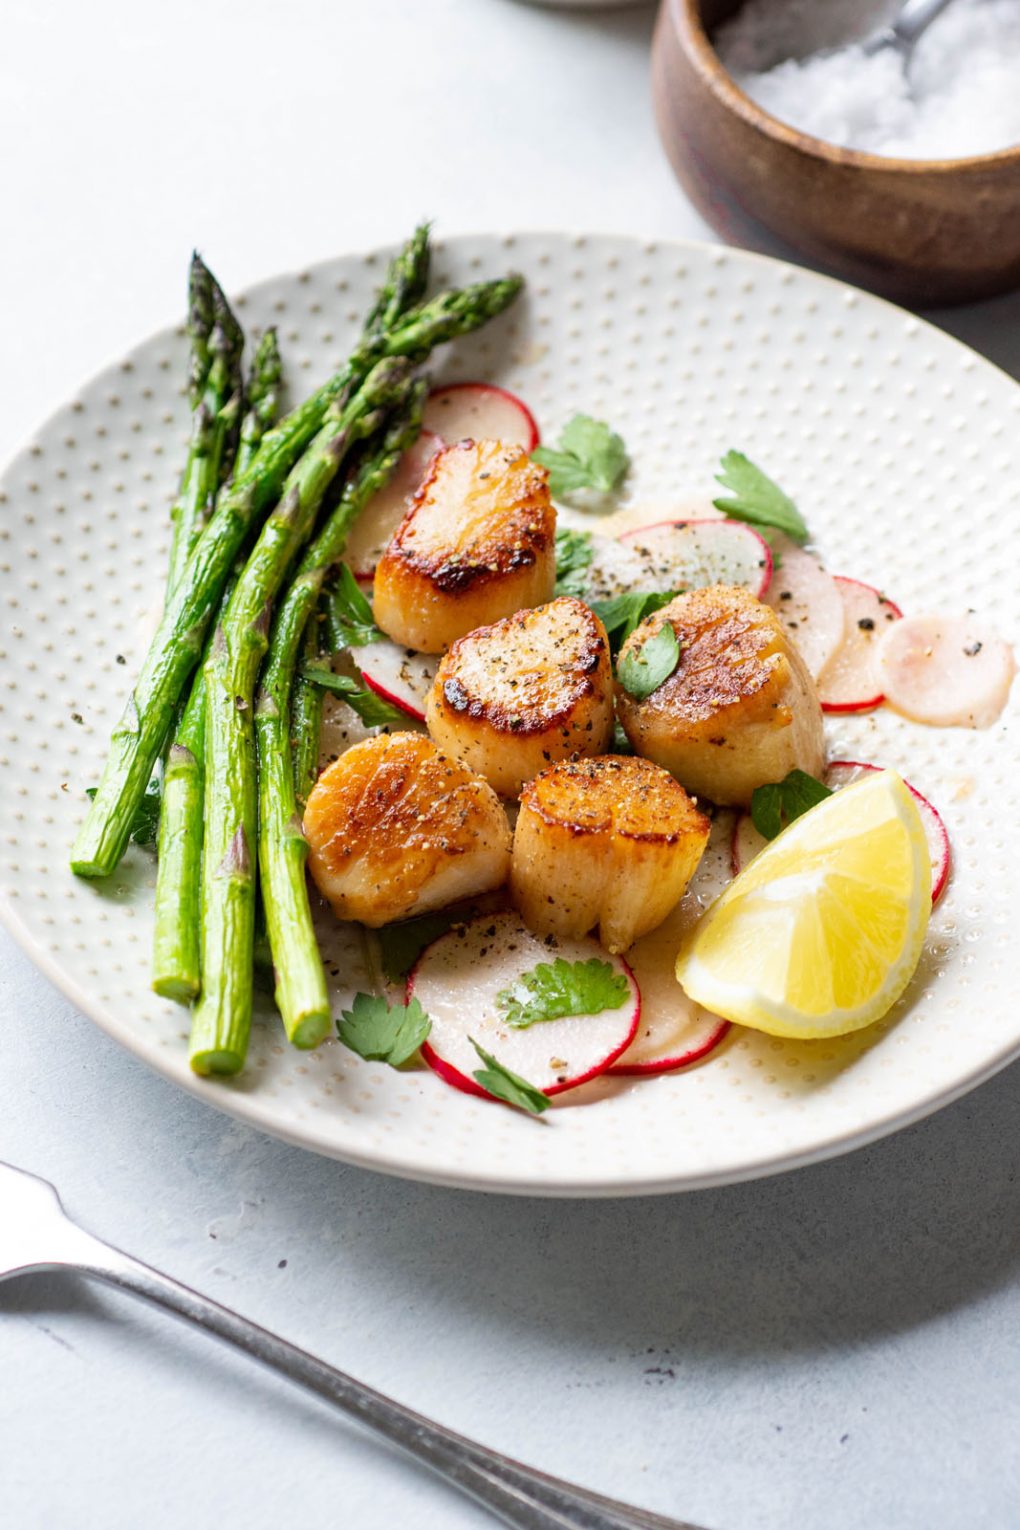 Side angle shot of a white plate with seared scallops over a thinly sliced radish salad, next to a bundle of bright green asparagus. On a light background next to a wooden bowl of flaky sea salt and a silver fork.